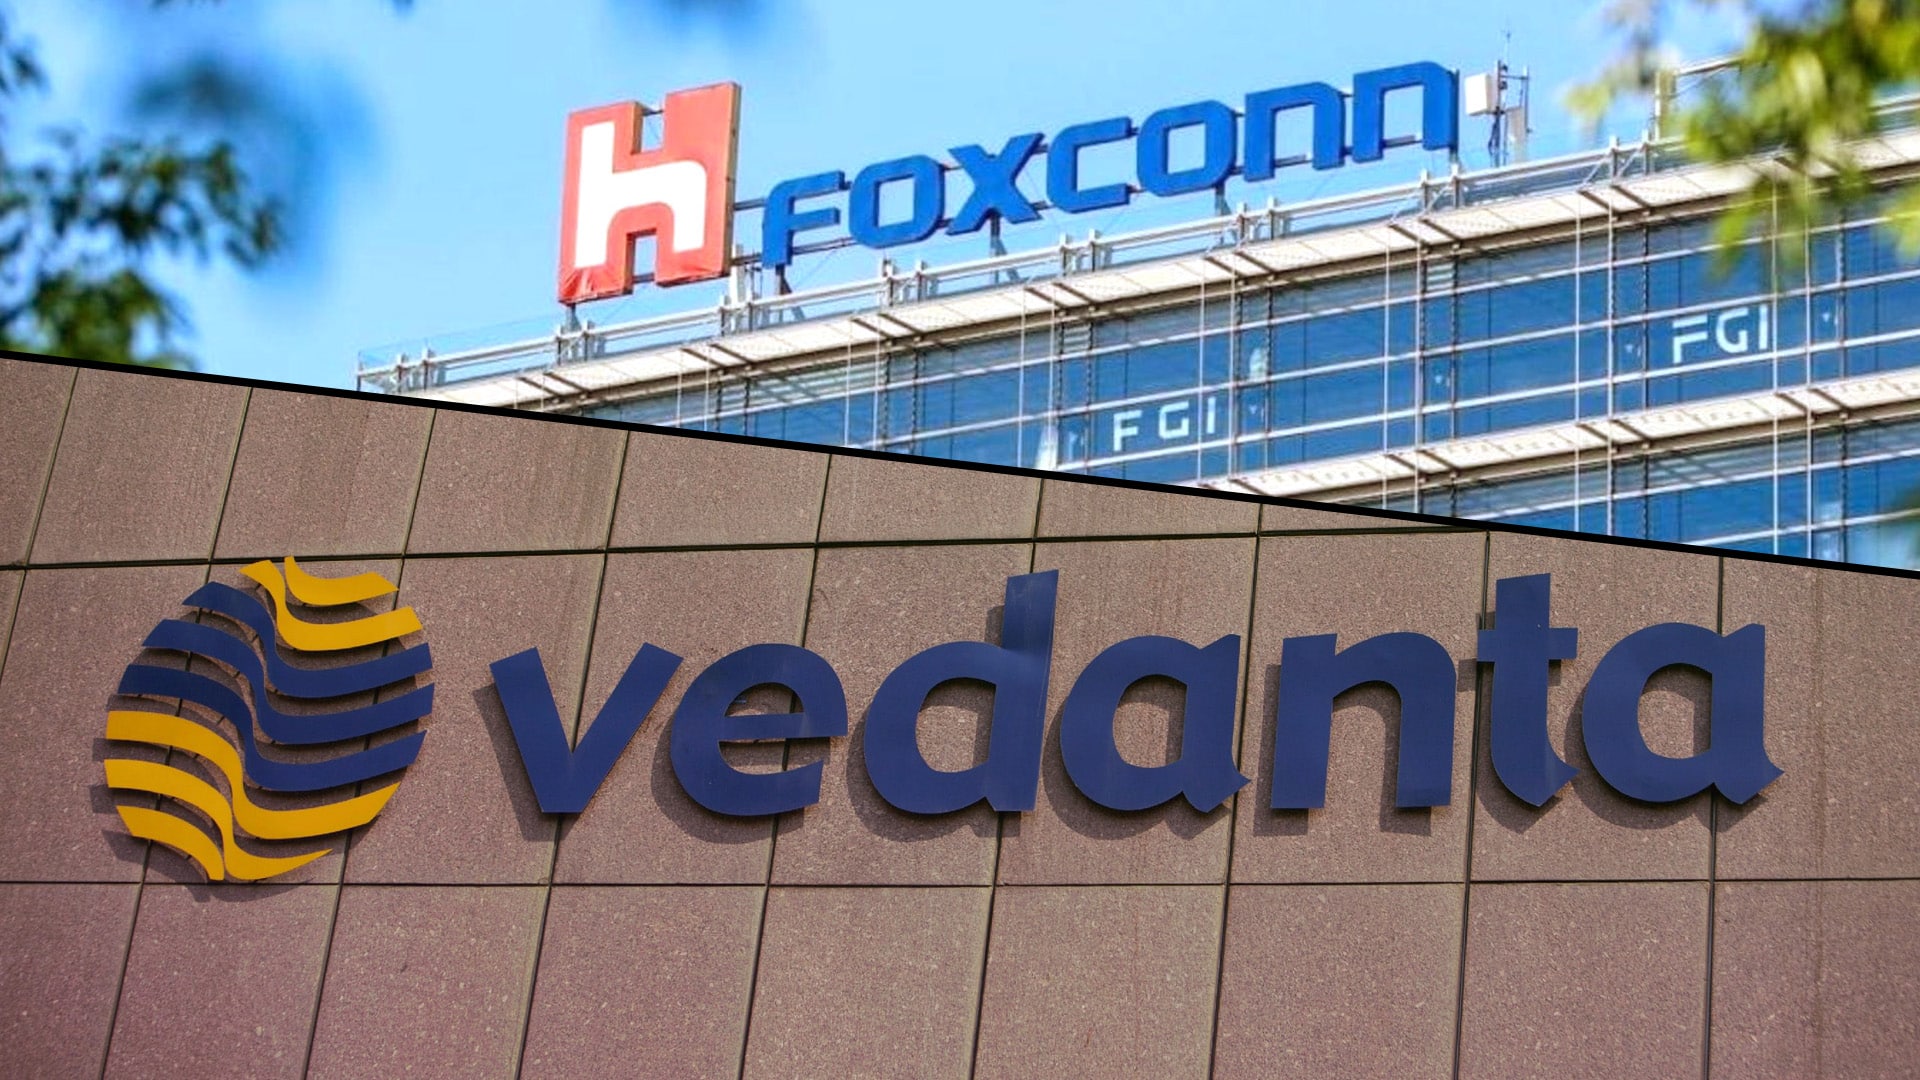 Foxconn, Vedanta committed to semicon mission, make in India: Vaishnaw